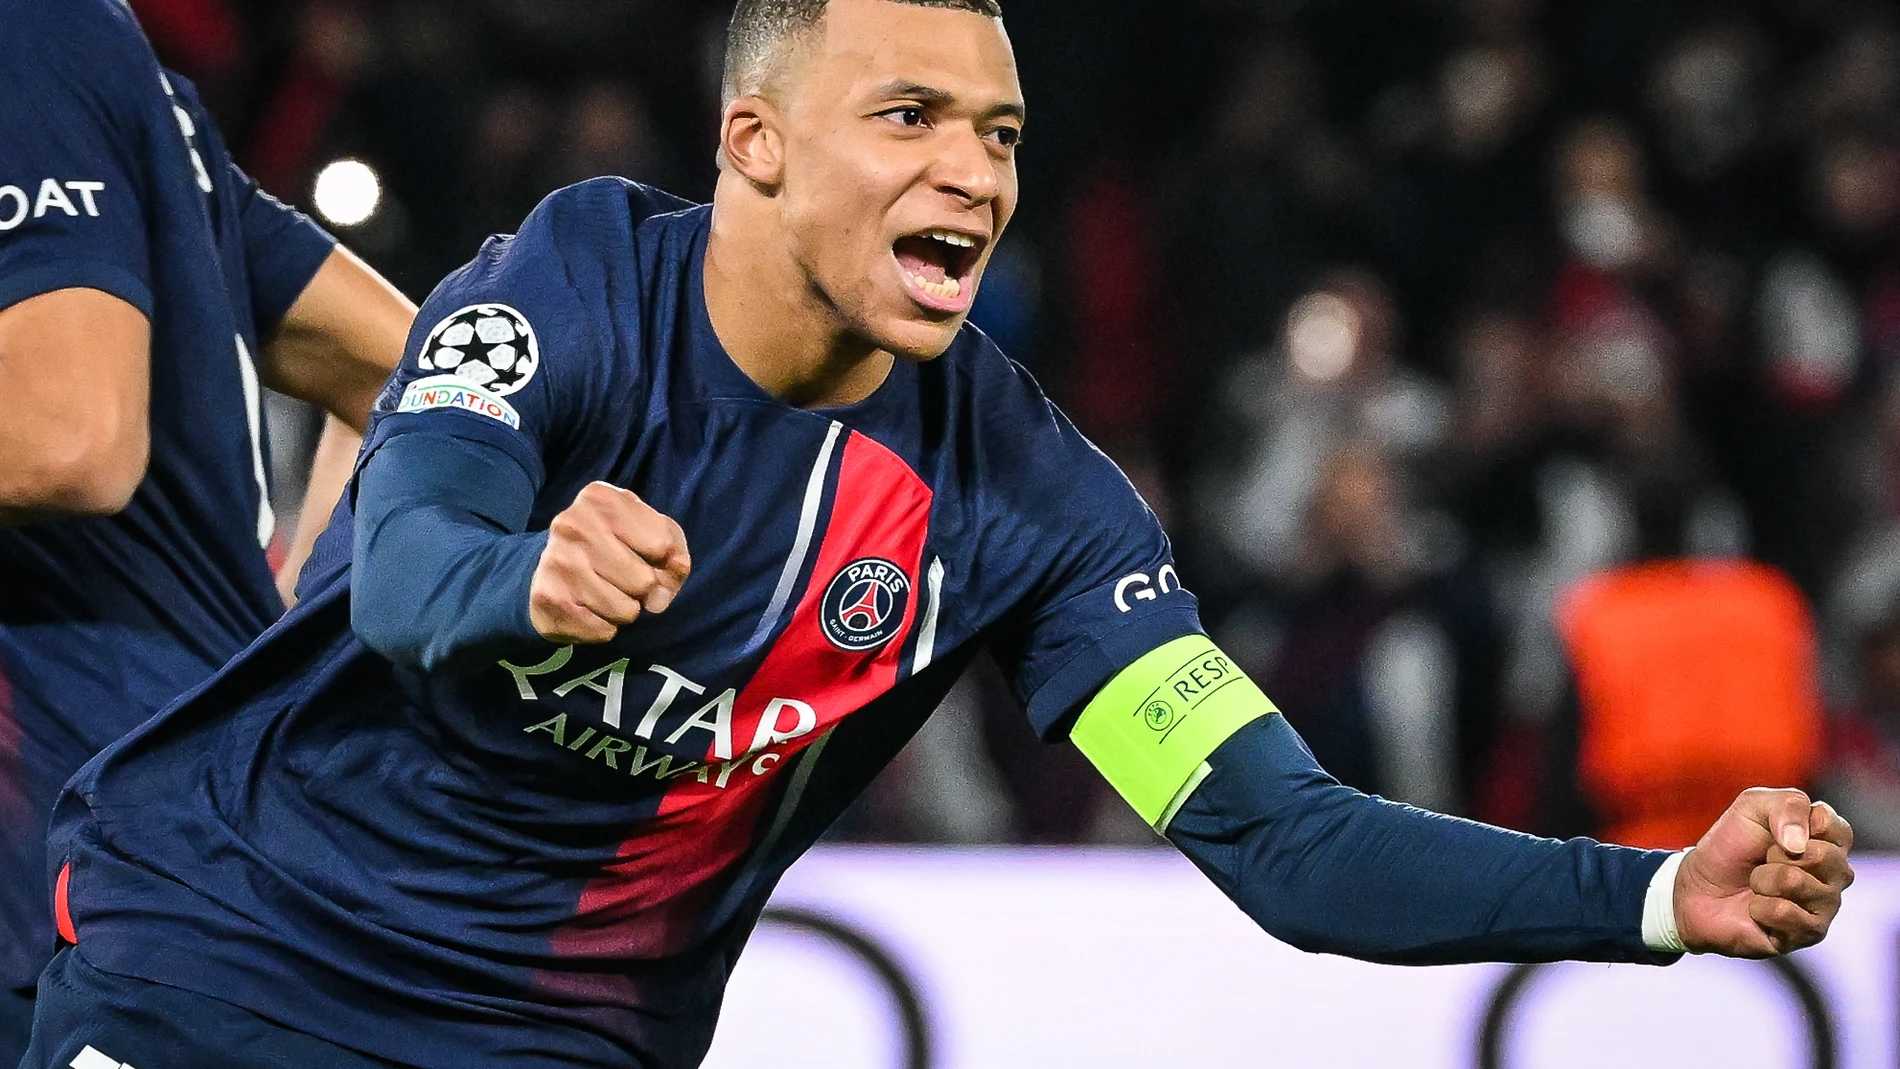 28 November 2023, France, Paris: Paris Saint-Germain's Kylian Mbappe celebrates scoring his side's first goal during the UEFA Champions League Group F soccer match between Paris Saint-Germain and Newcastle United at the Parc des Princes. Photo: Matthieu Mirville/ZUMA Press Wire/dpaMatthieu Mirville/ZUMA Press Wir / DPA28/11/2023 ONLY FOR USE IN SPAIN